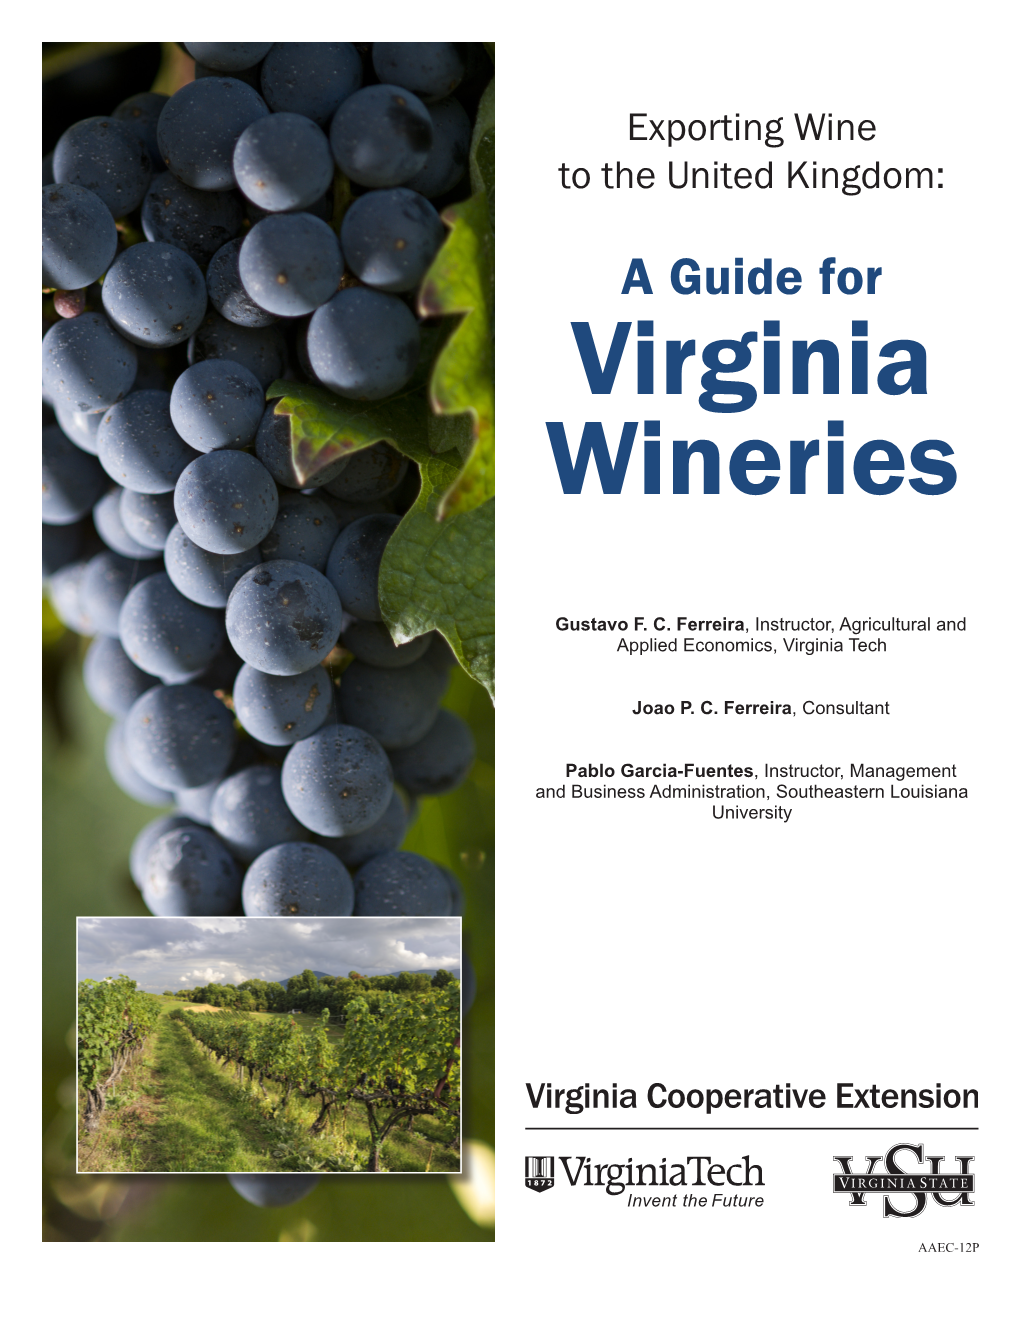 Virginia Wineries About the United Kingdom As an Export Market and Discusses Some of on the Supply Side, the Production of Wine in the U.S